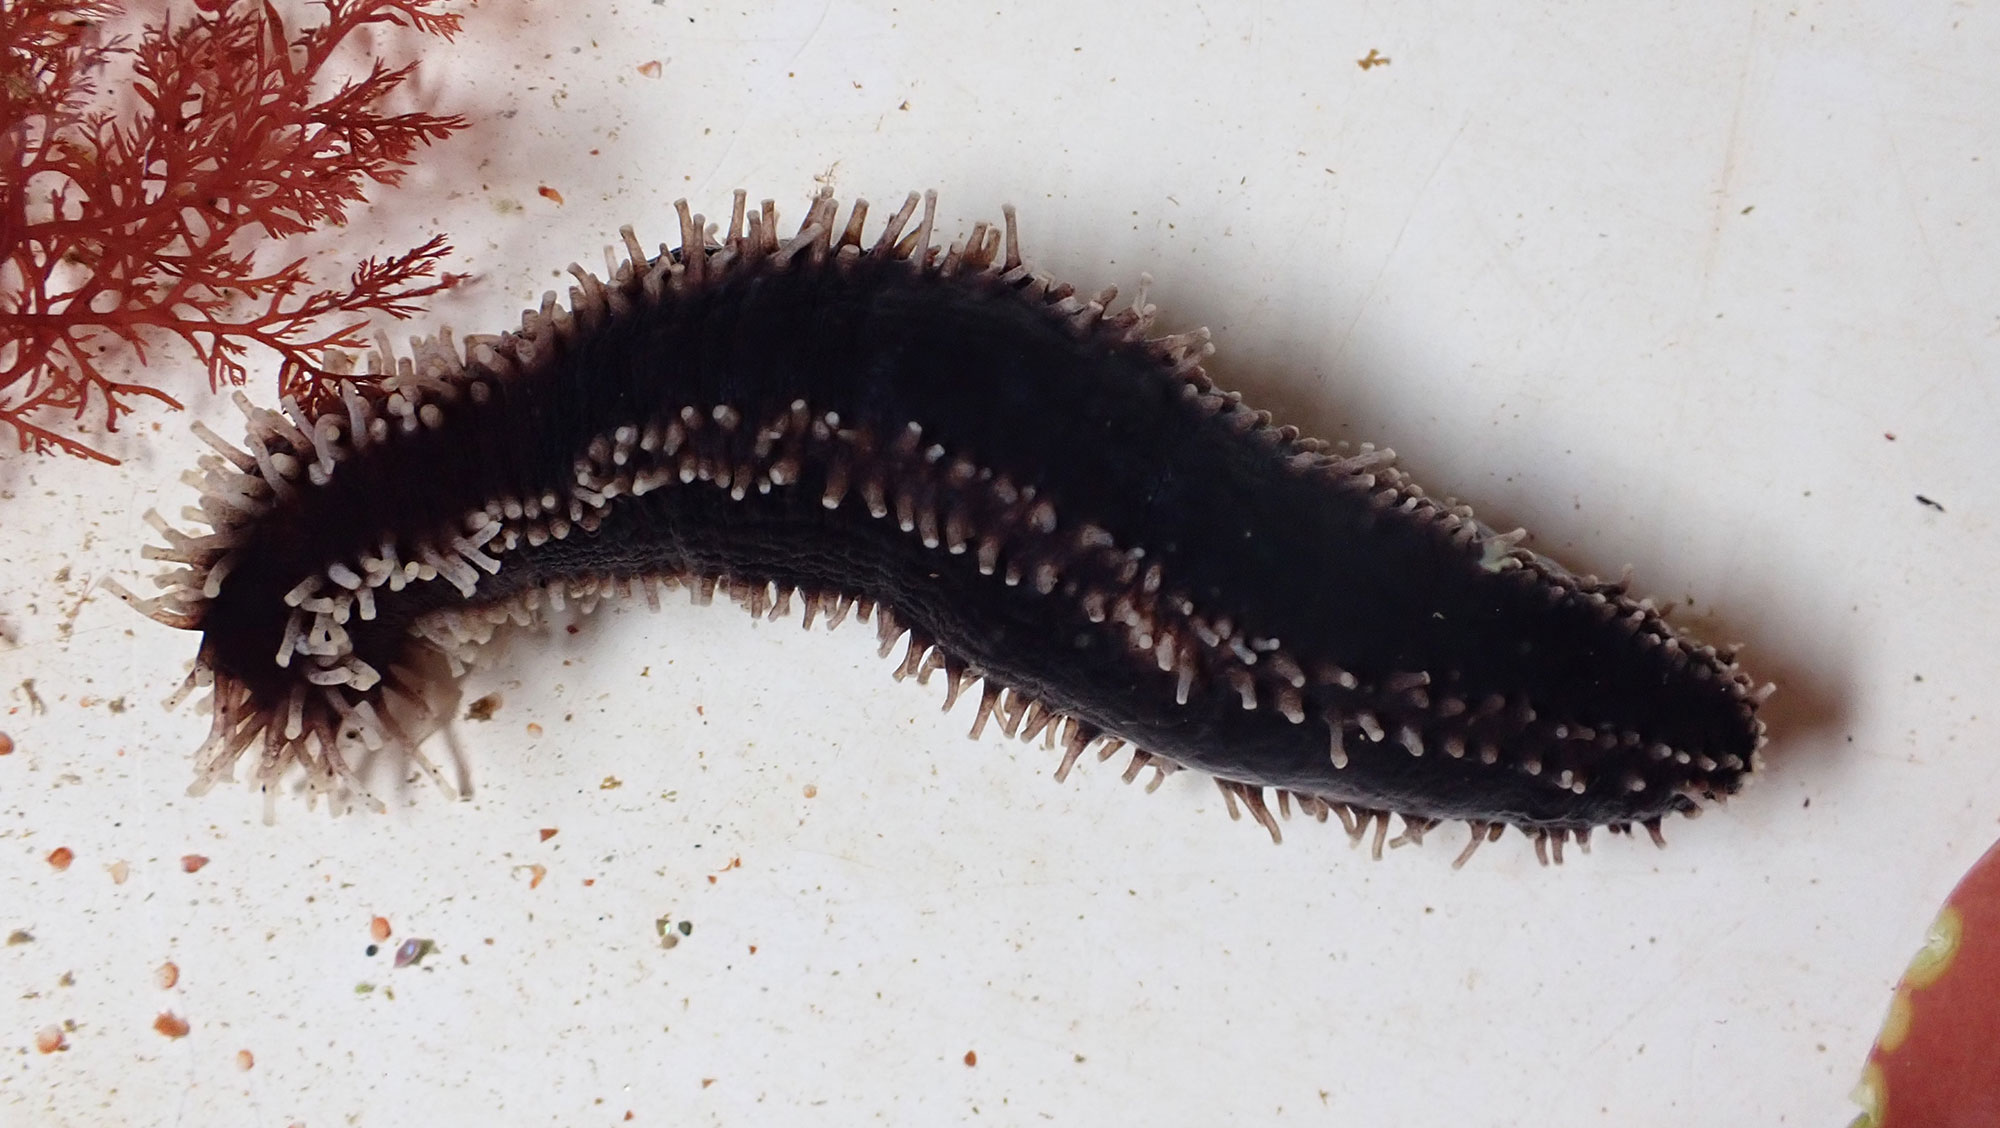 Close up of brown sea cucumber and its paired rows of whitish tube feet